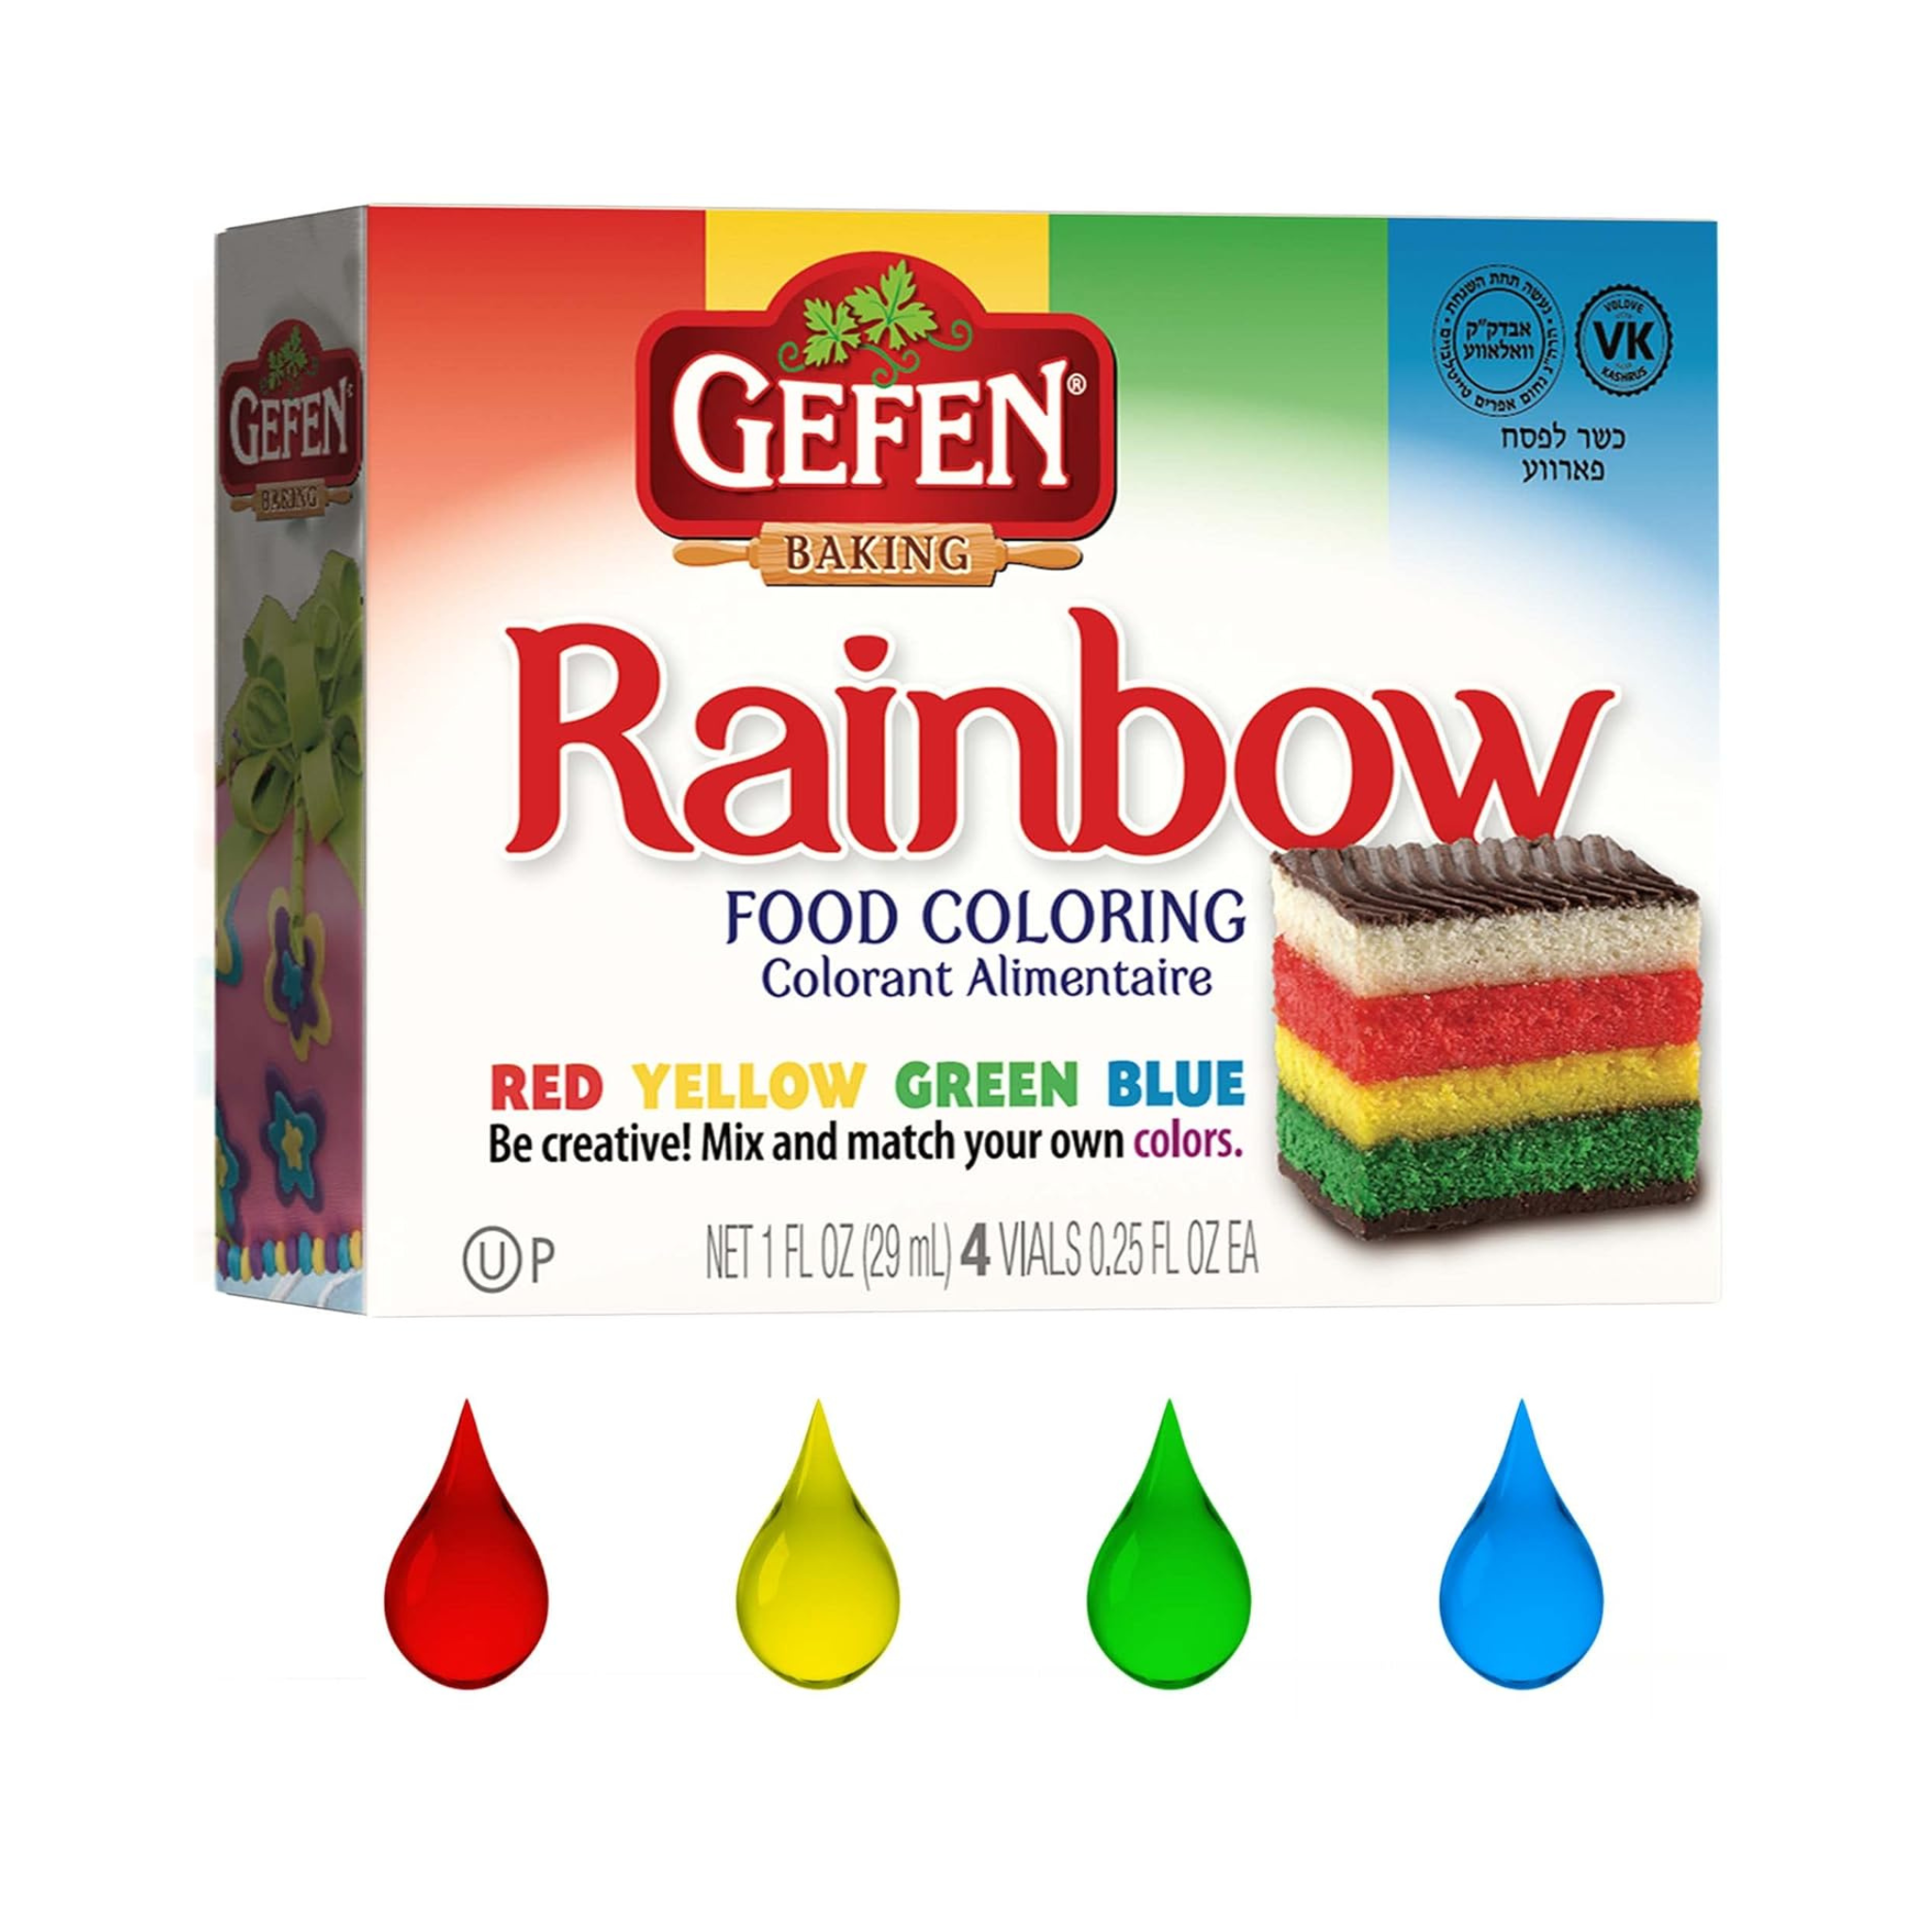 Gefen Rainbow Food Coloring, OU Passover